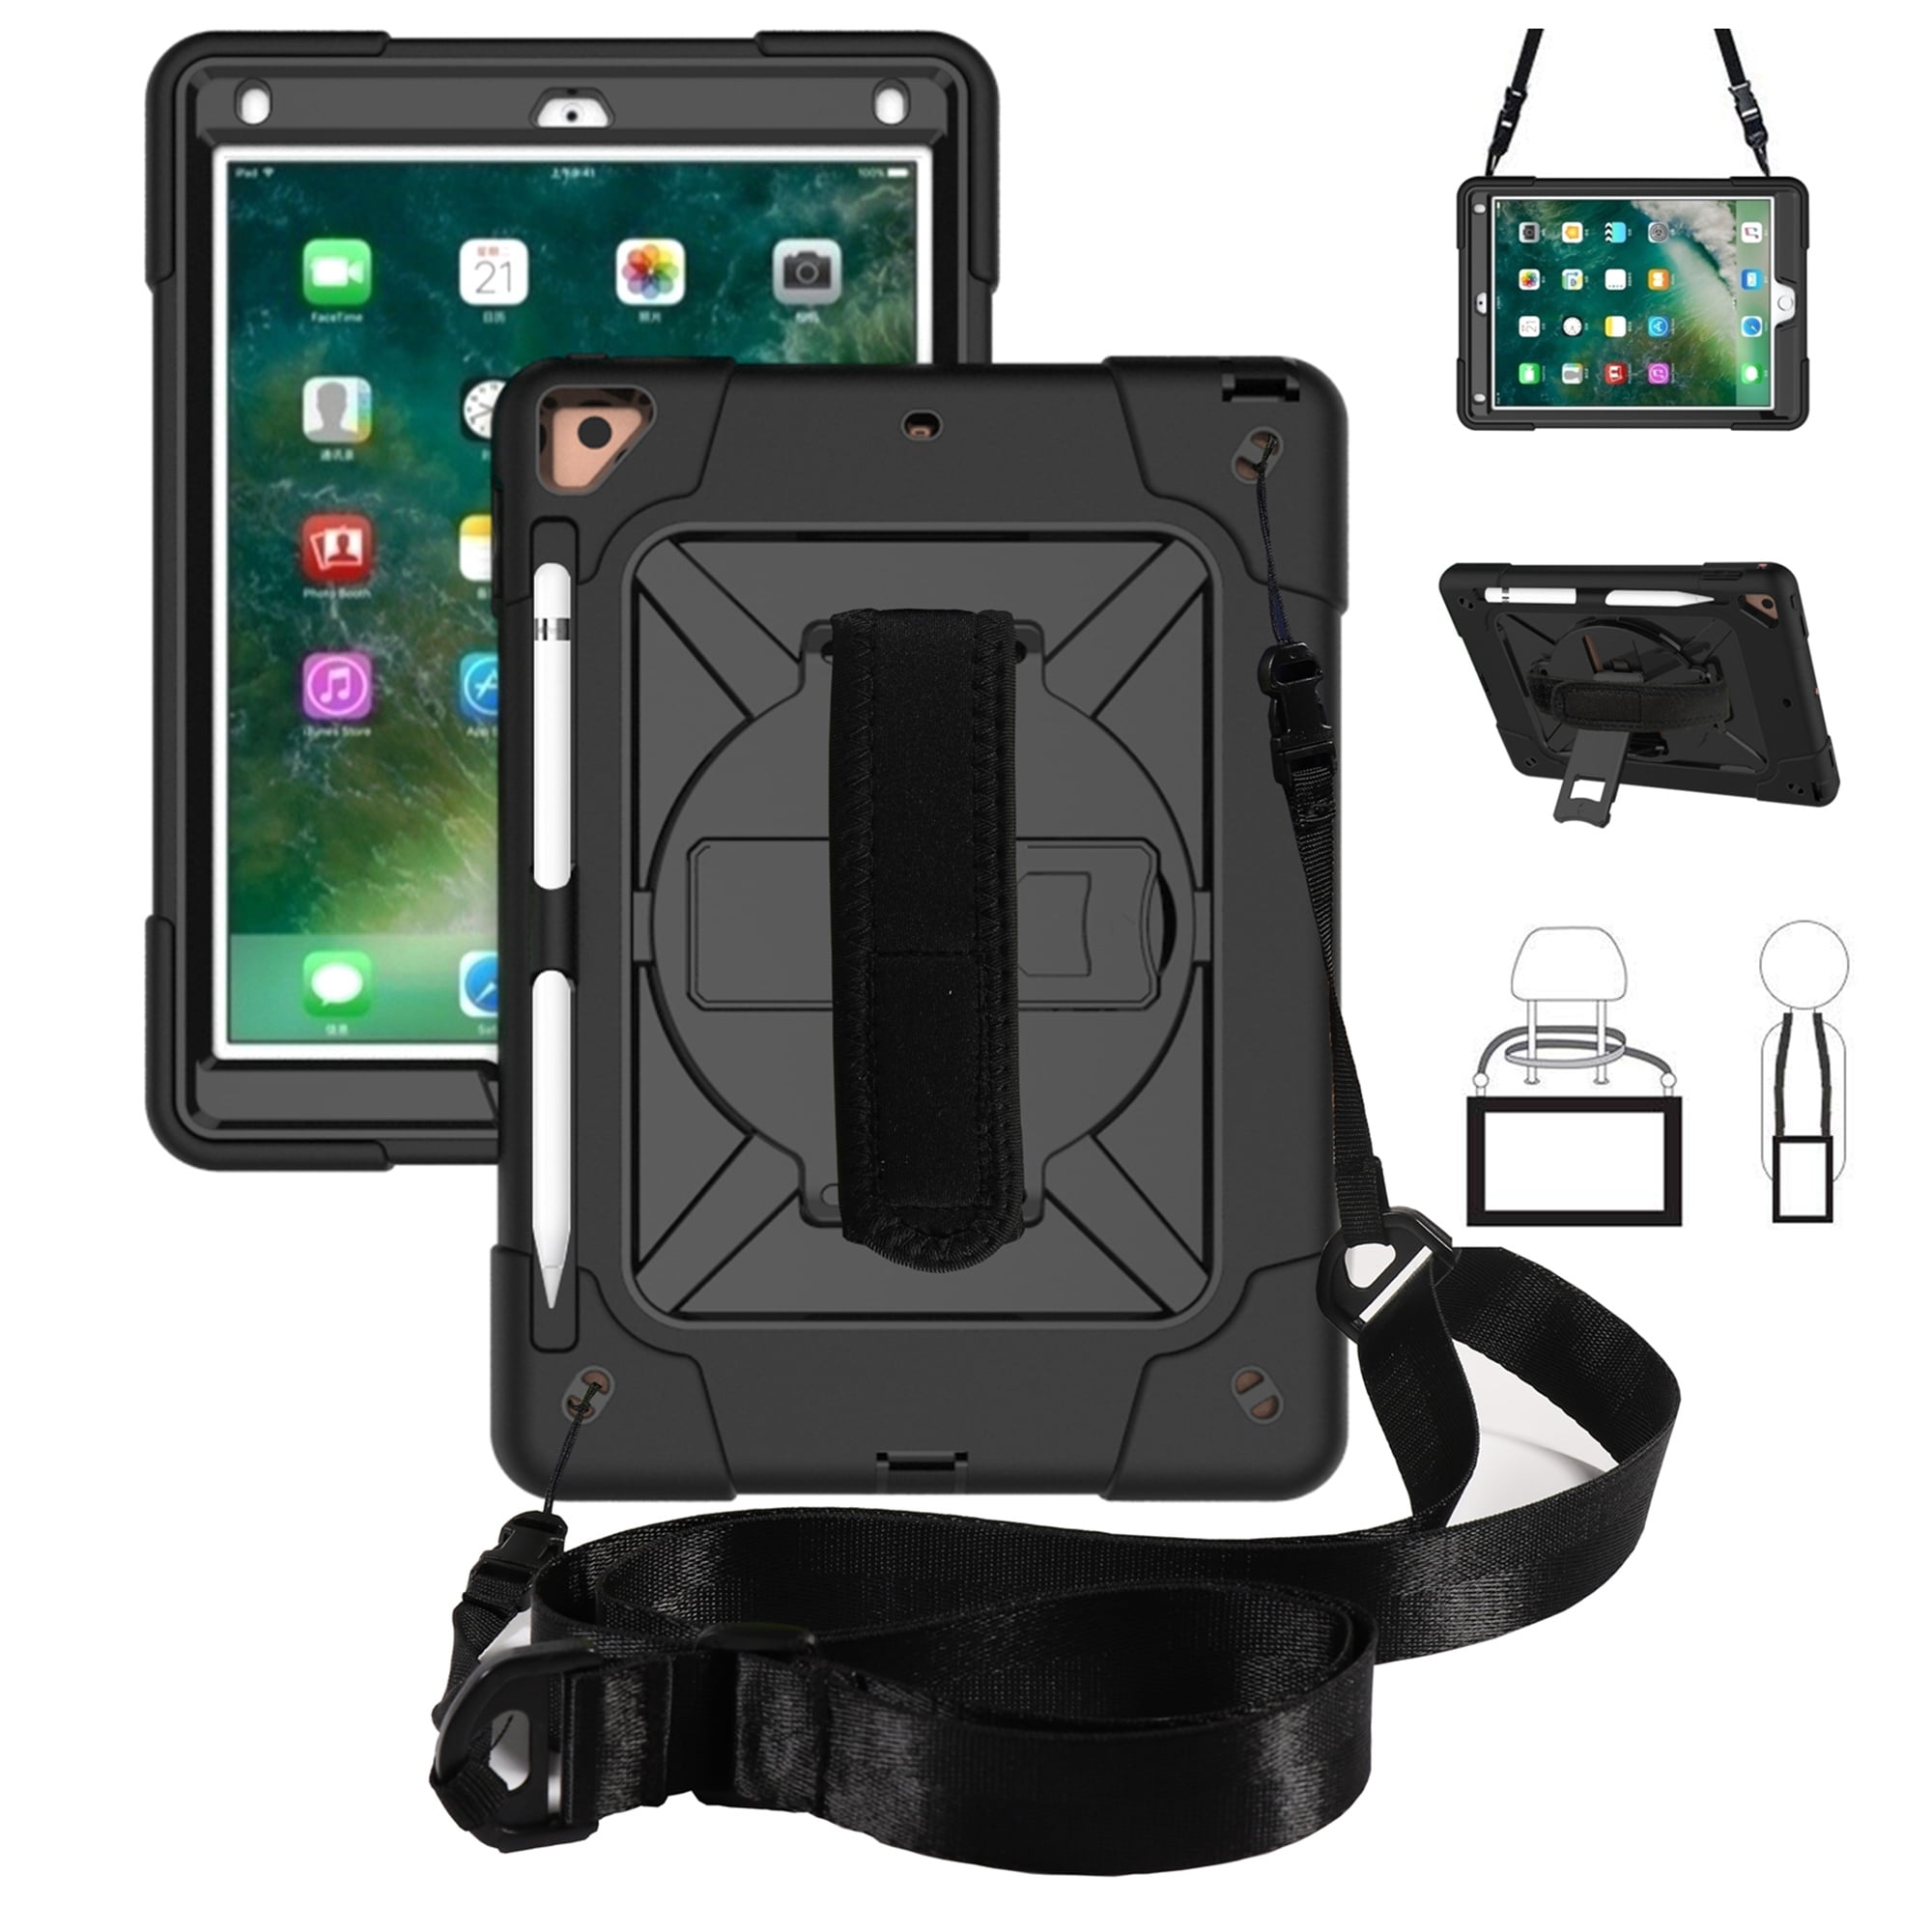 iPad 10.2 inch 2020/2019 Shockproof Case, Dteck Heavy Duty Rugged 3 Layer Full Body Protection